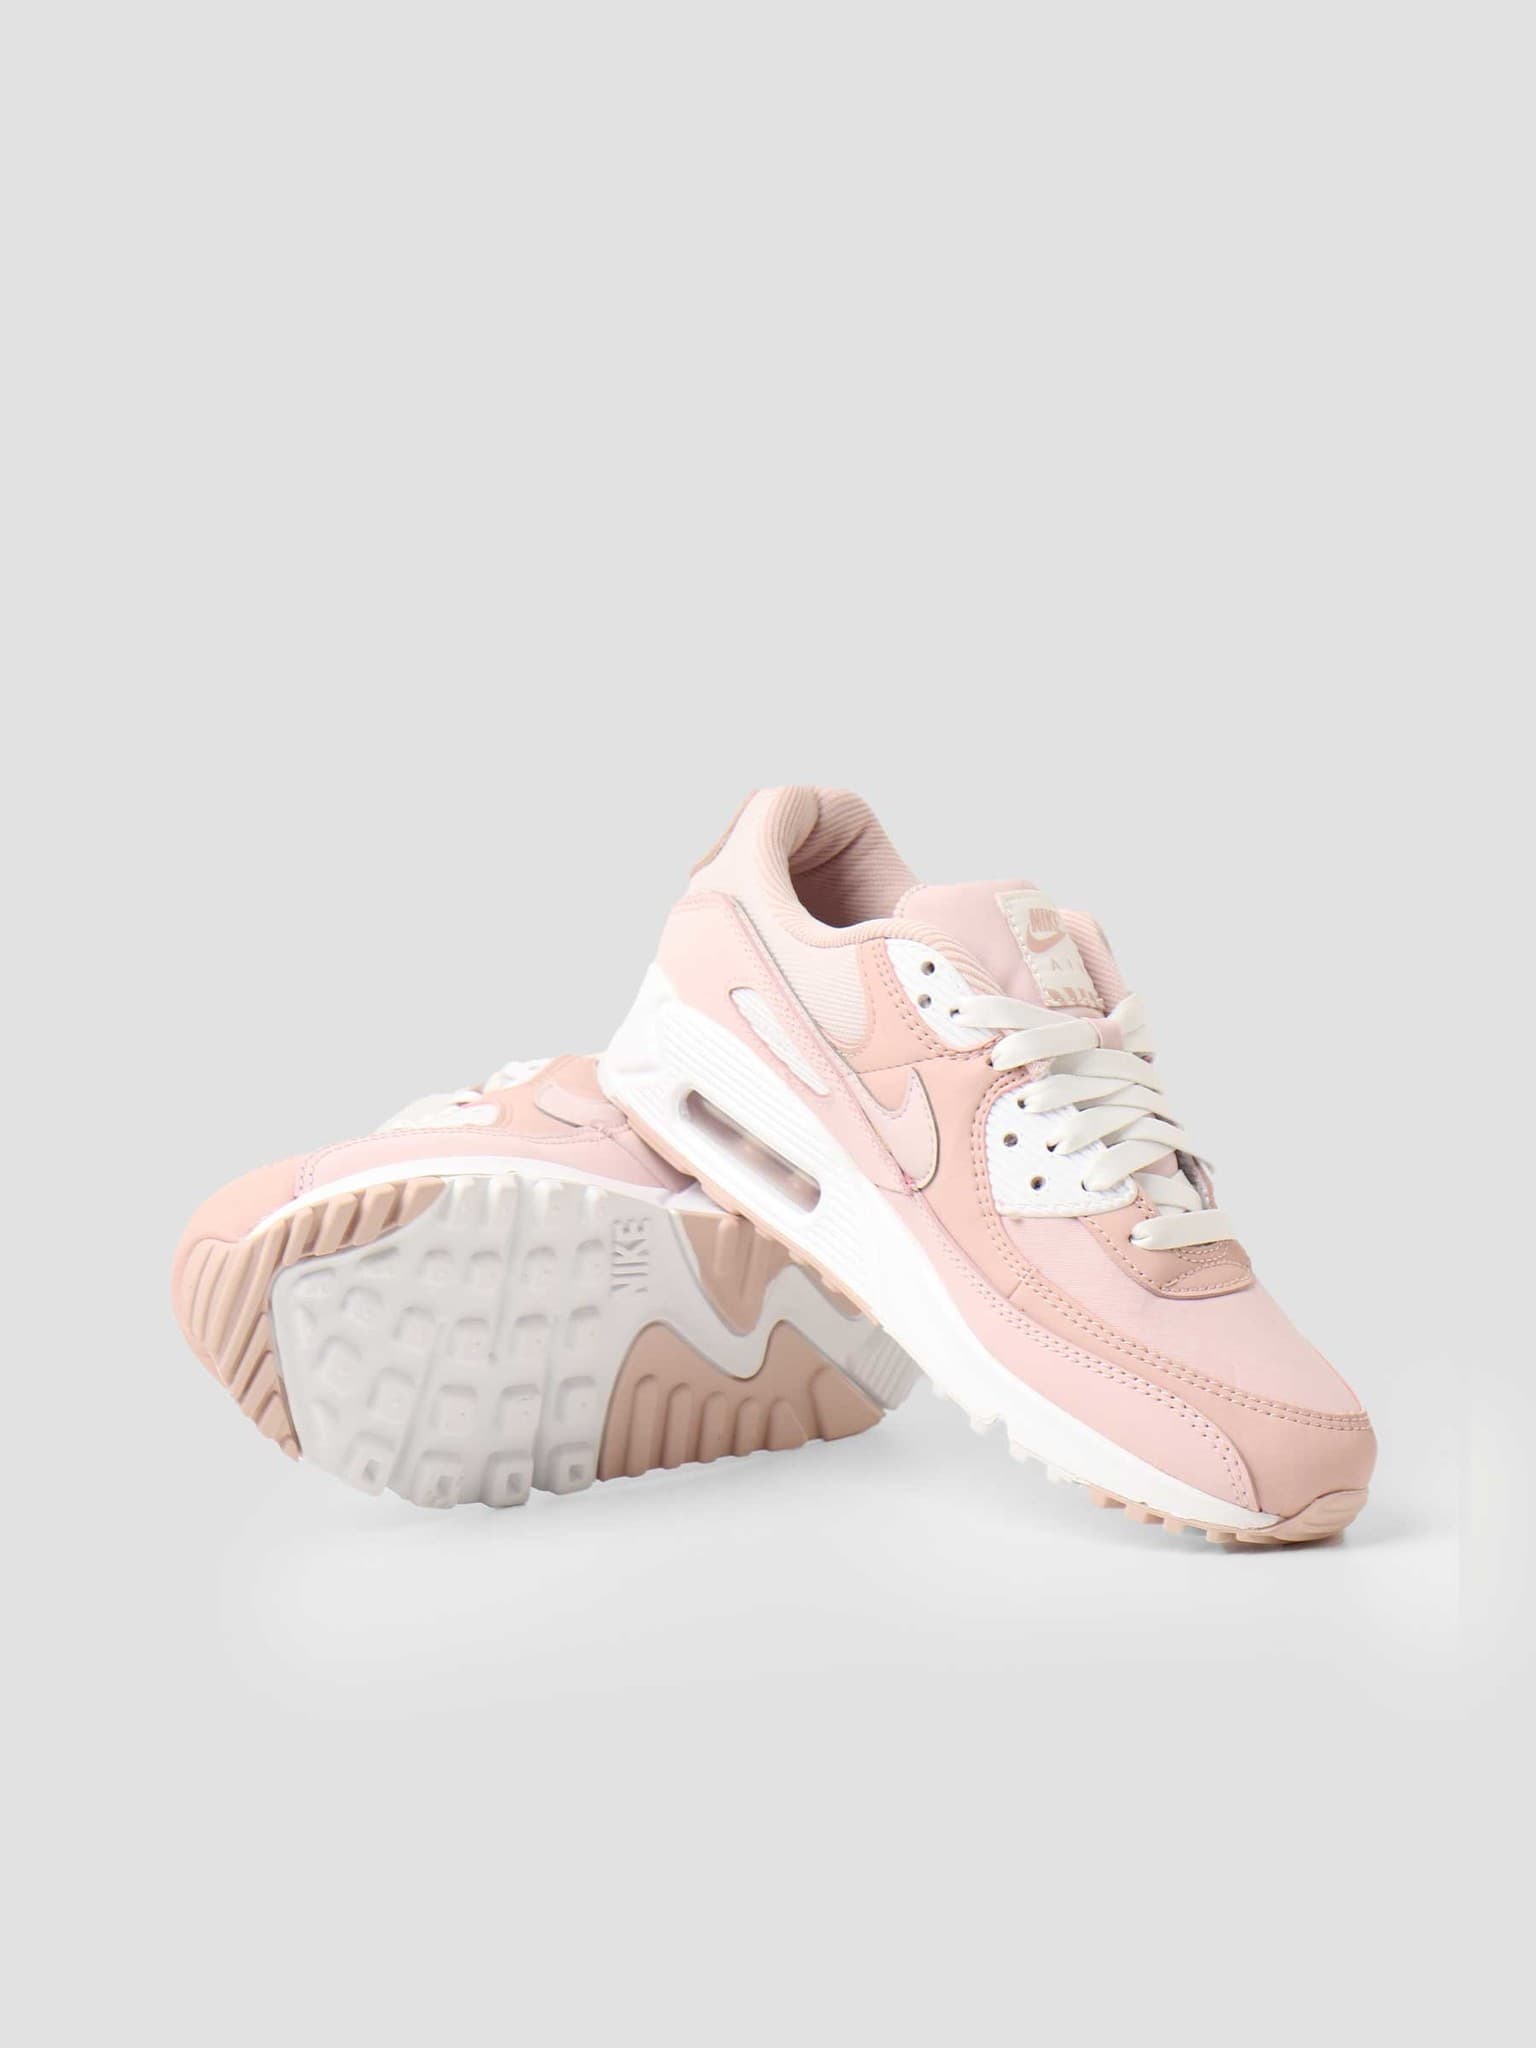 W Air Max 90 Barely Rose Barely Rose Pink Oxford DJ3862-600